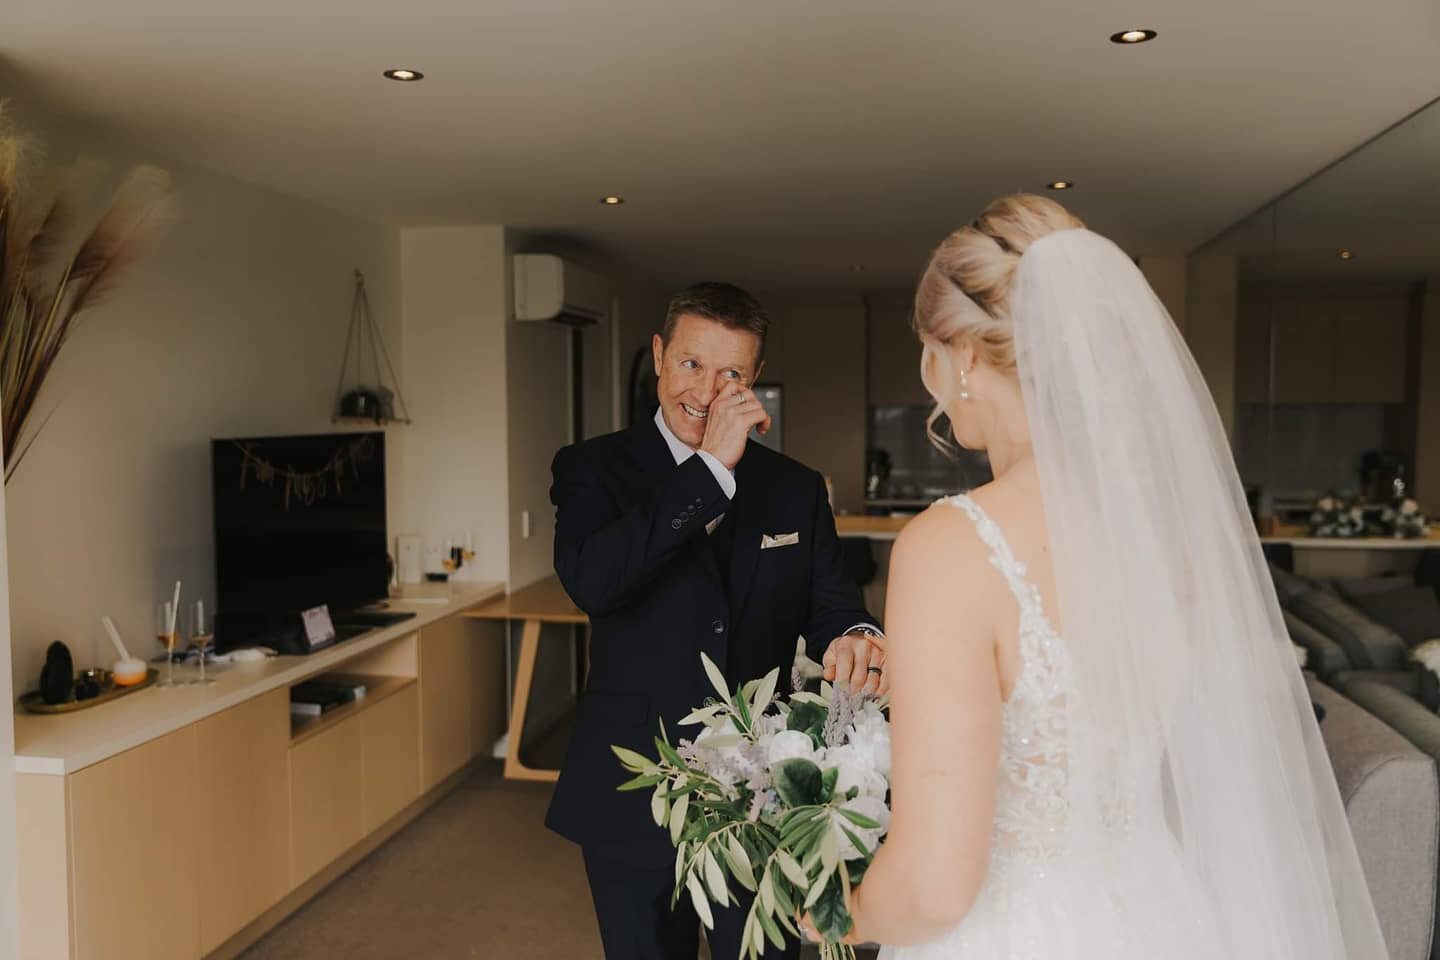 First look reactions 💫⭐

If you have time to do a little 'reveal' with your dad or loved ones before you hop in the car to head to the ceremony I totally recommend it! I did one with my dad before I walked down the isle and it was seriously the best